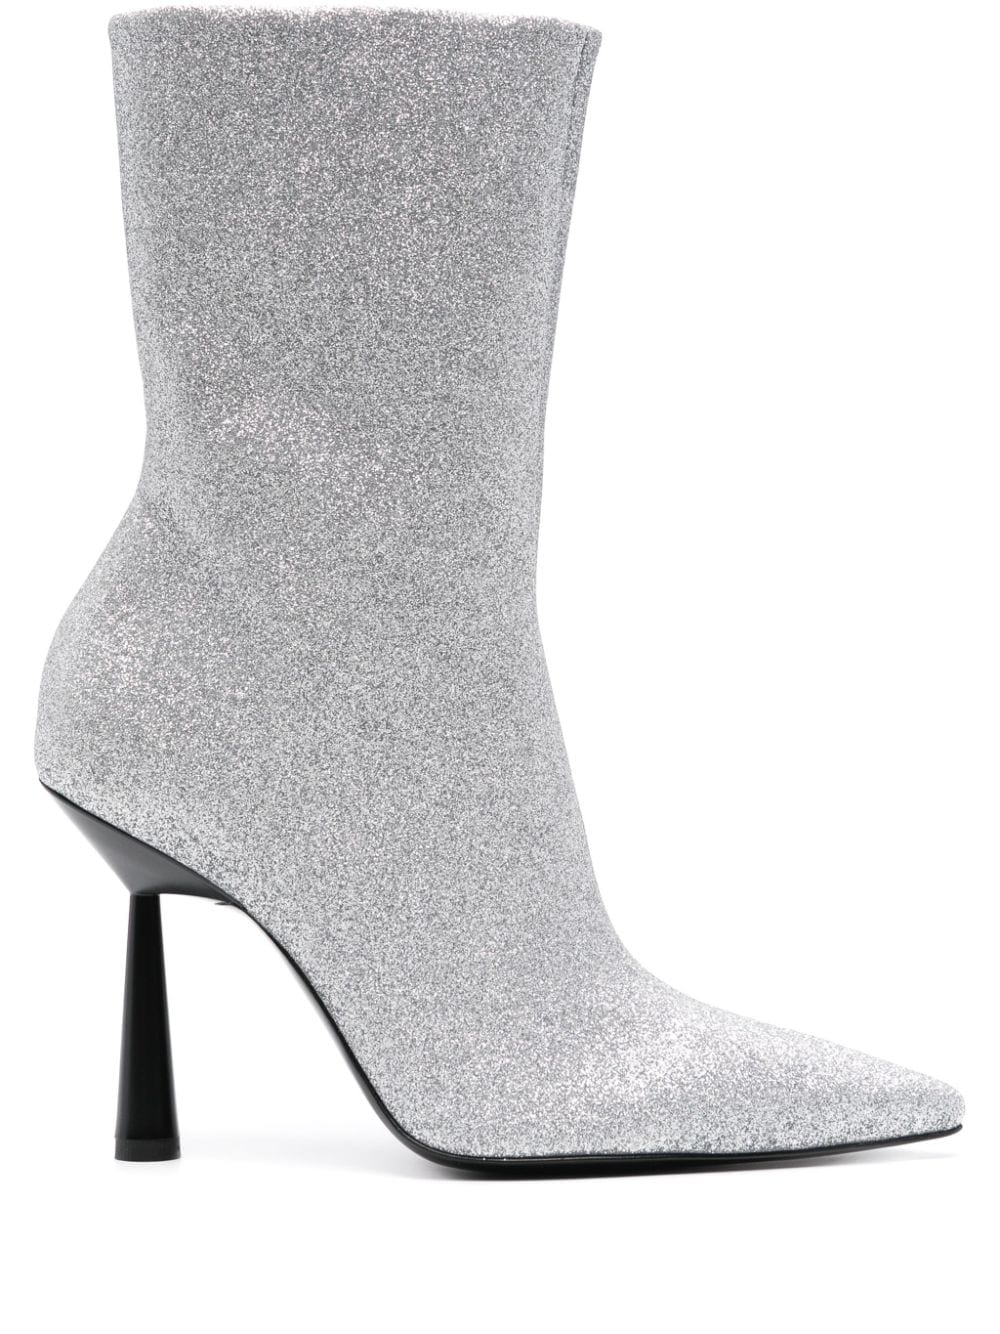 Shop Gia Borghini Rosie 100mm Glittered Ankle Boots In Silver